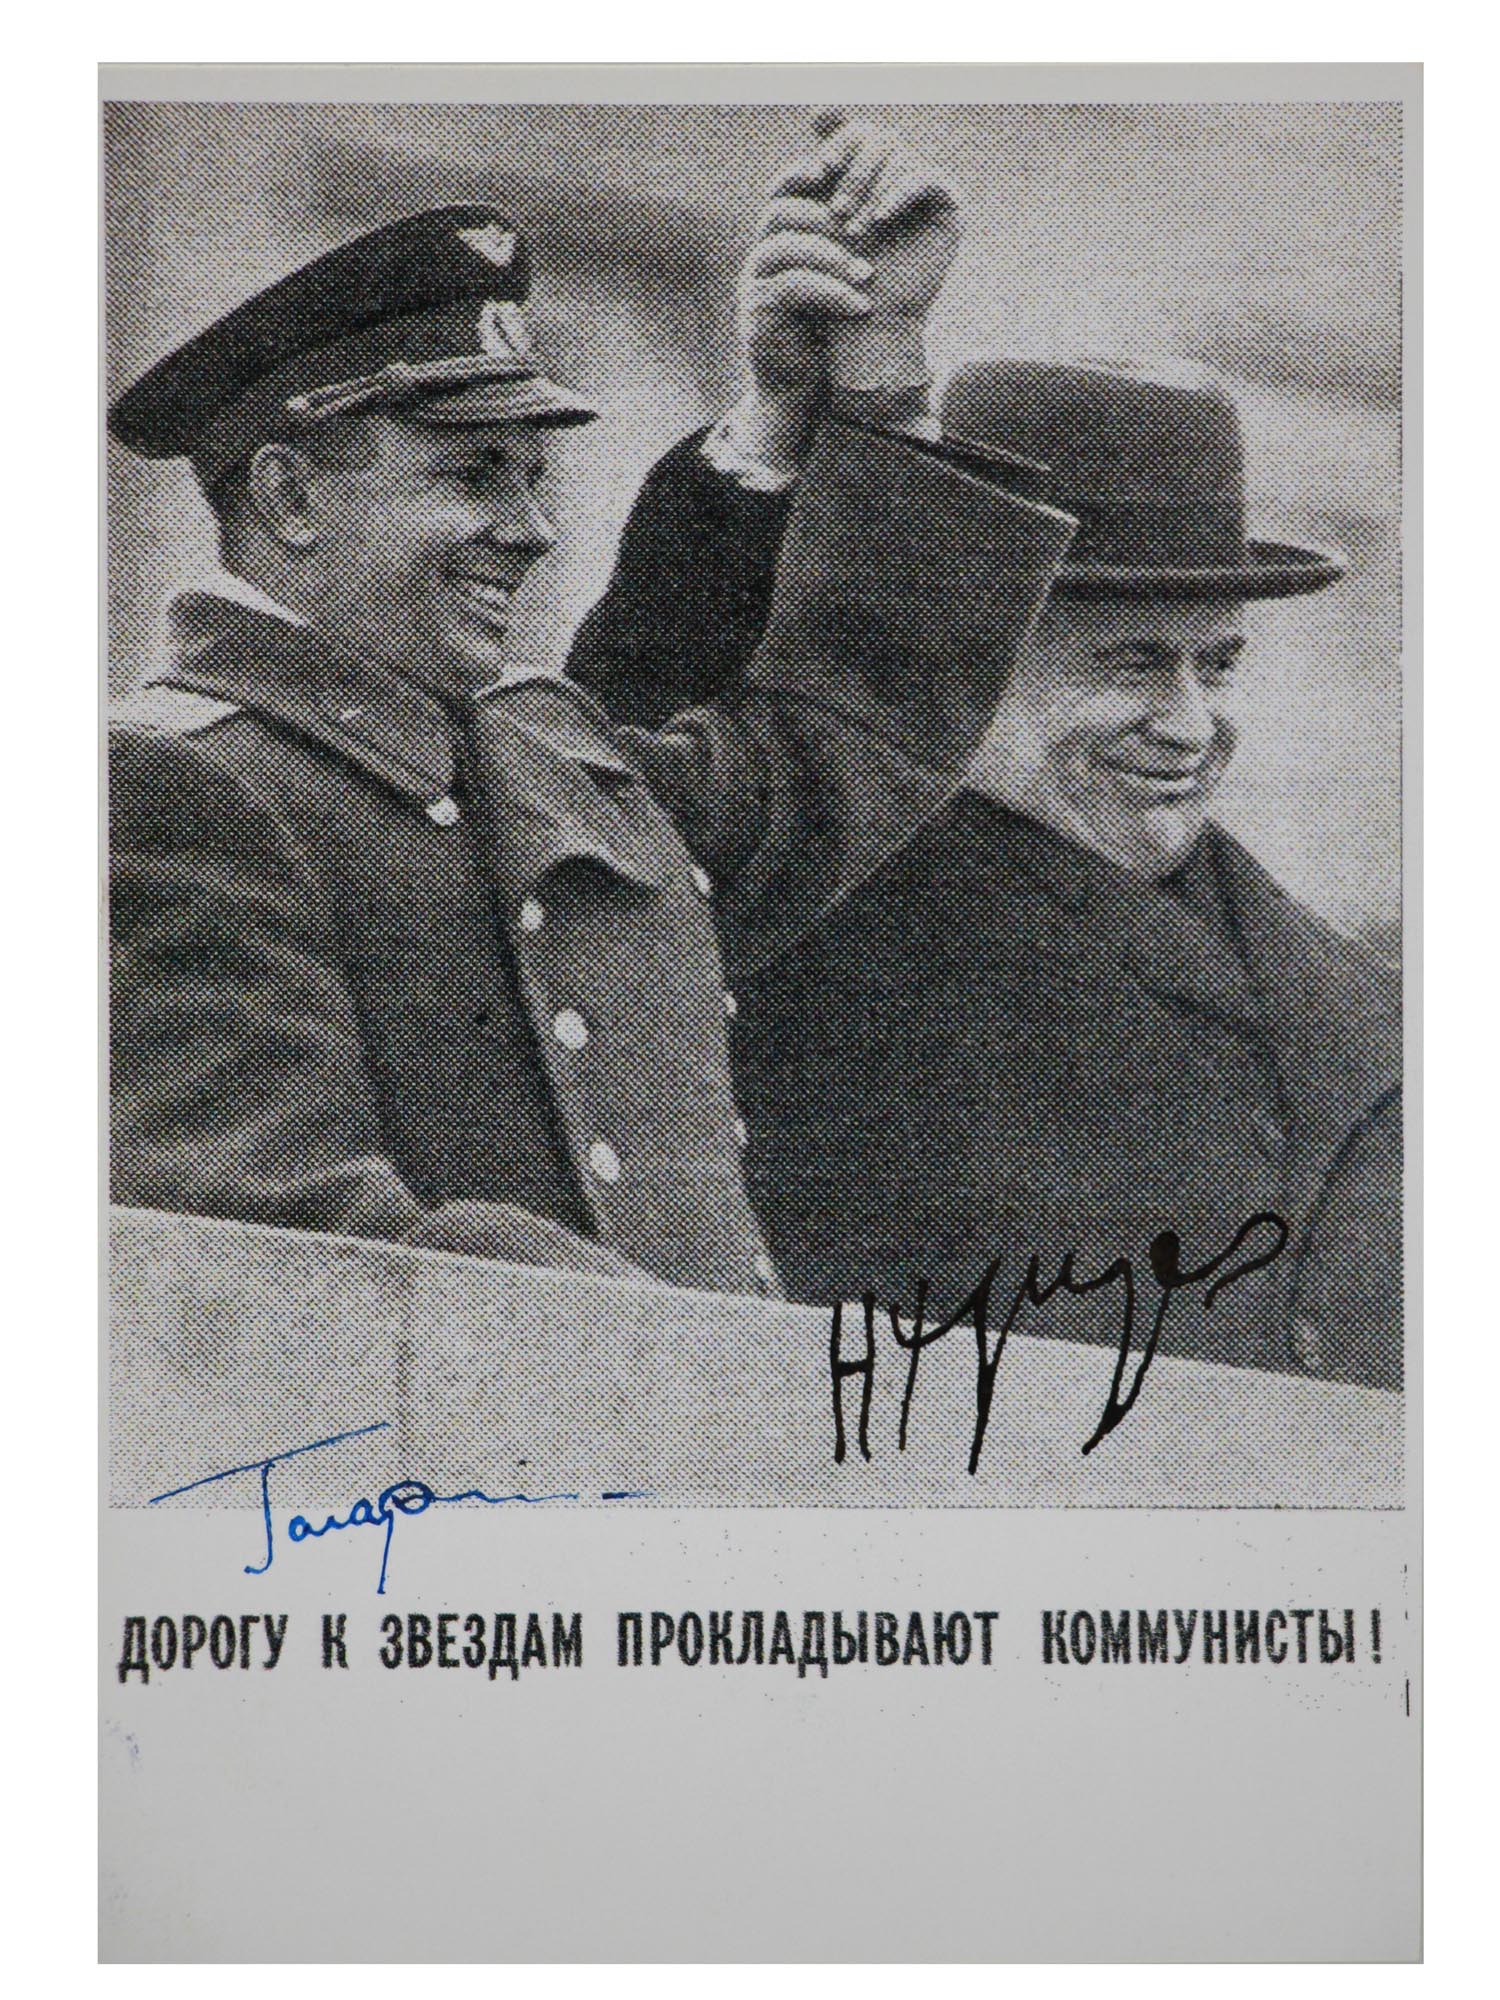 A SOVIET SIGNED PHOTOGRAPH KHRUSHCHEV AND GAGARIN PIC-0